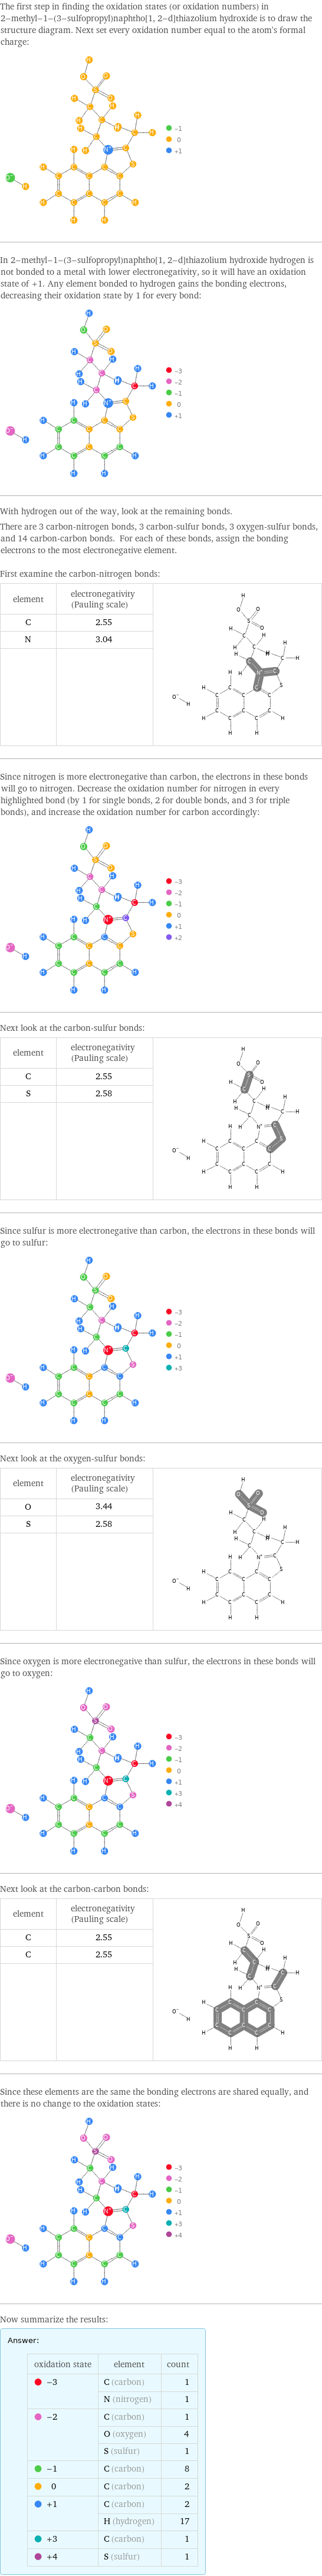 The first step in finding the oxidation states (or oxidation numbers) in 2-methyl-1-(3-sulfopropyl)naphtho[1, 2-d]thiazolium hydroxide is to draw the structure diagram. Next set every oxidation number equal to the atom's formal charge:  In 2-methyl-1-(3-sulfopropyl)naphtho[1, 2-d]thiazolium hydroxide hydrogen is not bonded to a metal with lower electronegativity, so it will have an oxidation state of +1. Any element bonded to hydrogen gains the bonding electrons, decreasing their oxidation state by 1 for every bond:  With hydrogen out of the way, look at the remaining bonds. There are 3 carbon-nitrogen bonds, 3 carbon-sulfur bonds, 3 oxygen-sulfur bonds, and 14 carbon-carbon bonds. For each of these bonds, assign the bonding electrons to the most electronegative element.  First examine the carbon-nitrogen bonds: element | electronegativity (Pauling scale) |  C | 2.55 |  N | 3.04 |   | |  Since nitrogen is more electronegative than carbon, the electrons in these bonds will go to nitrogen. Decrease the oxidation number for nitrogen in every highlighted bond (by 1 for single bonds, 2 for double bonds, and 3 for triple bonds), and increase the oxidation number for carbon accordingly:  Next look at the carbon-sulfur bonds: element | electronegativity (Pauling scale) |  C | 2.55 |  S | 2.58 |   | |  Since sulfur is more electronegative than carbon, the electrons in these bonds will go to sulfur:  Next look at the oxygen-sulfur bonds: element | electronegativity (Pauling scale) |  O | 3.44 |  S | 2.58 |   | |  Since oxygen is more electronegative than sulfur, the electrons in these bonds will go to oxygen:  Next look at the carbon-carbon bonds: element | electronegativity (Pauling scale) |  C | 2.55 |  C | 2.55 |   | |  Since these elements are the same the bonding electrons are shared equally, and there is no change to the oxidation states:  Now summarize the results: Answer: |   | oxidation state | element | count  -3 | C (carbon) | 1  | N (nitrogen) | 1  -2 | C (carbon) | 1  | O (oxygen) | 4  | S (sulfur) | 1  -1 | C (carbon) | 8  0 | C (carbon) | 2  +1 | C (carbon) | 2  | H (hydrogen) | 17  +3 | C (carbon) | 1  +4 | S (sulfur) | 1